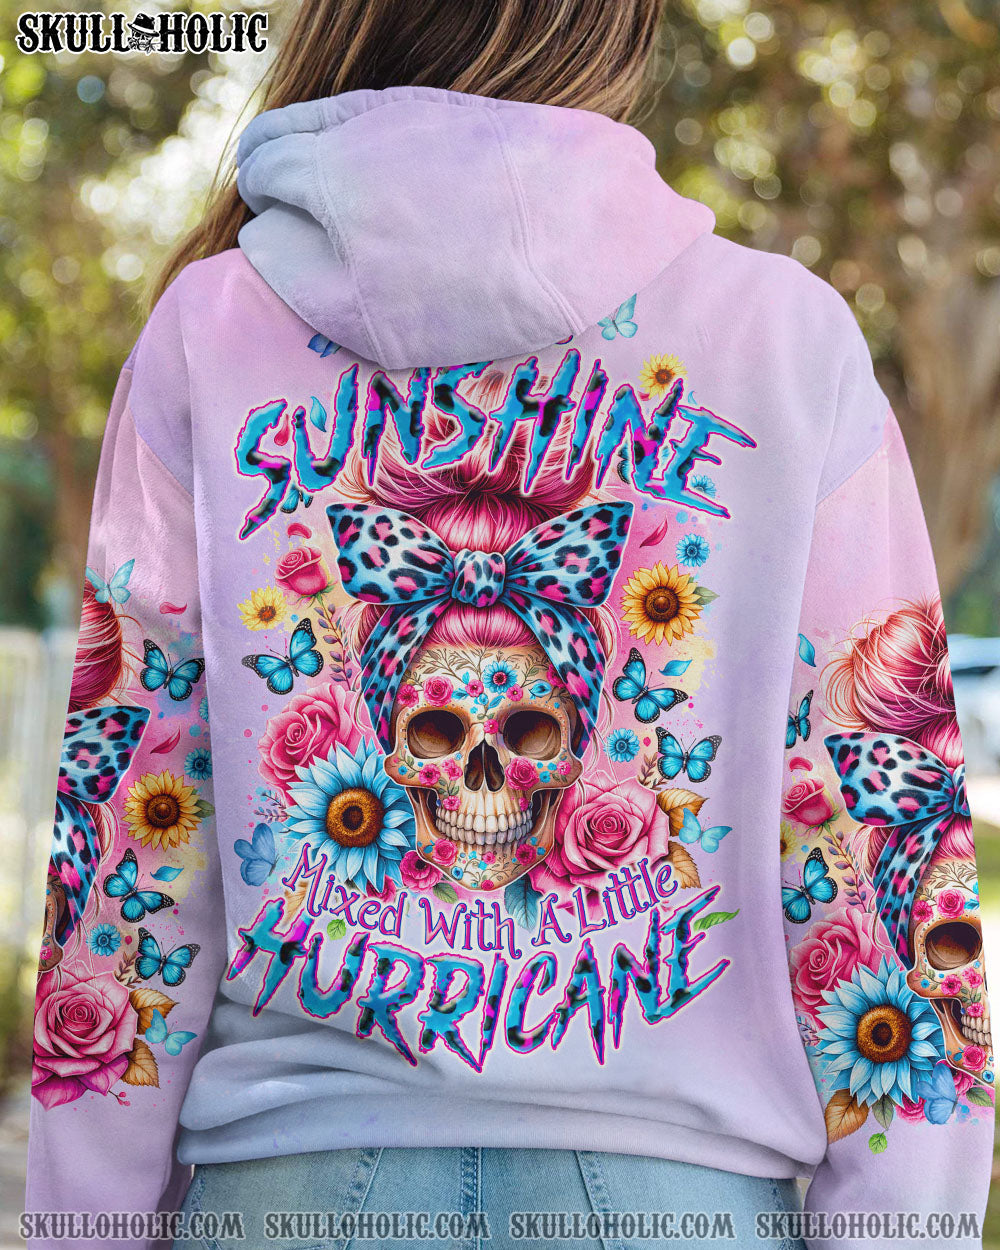 SHE IS SUNSHINE MESSY BUN ALL OVER PRINT - TYQY3011232